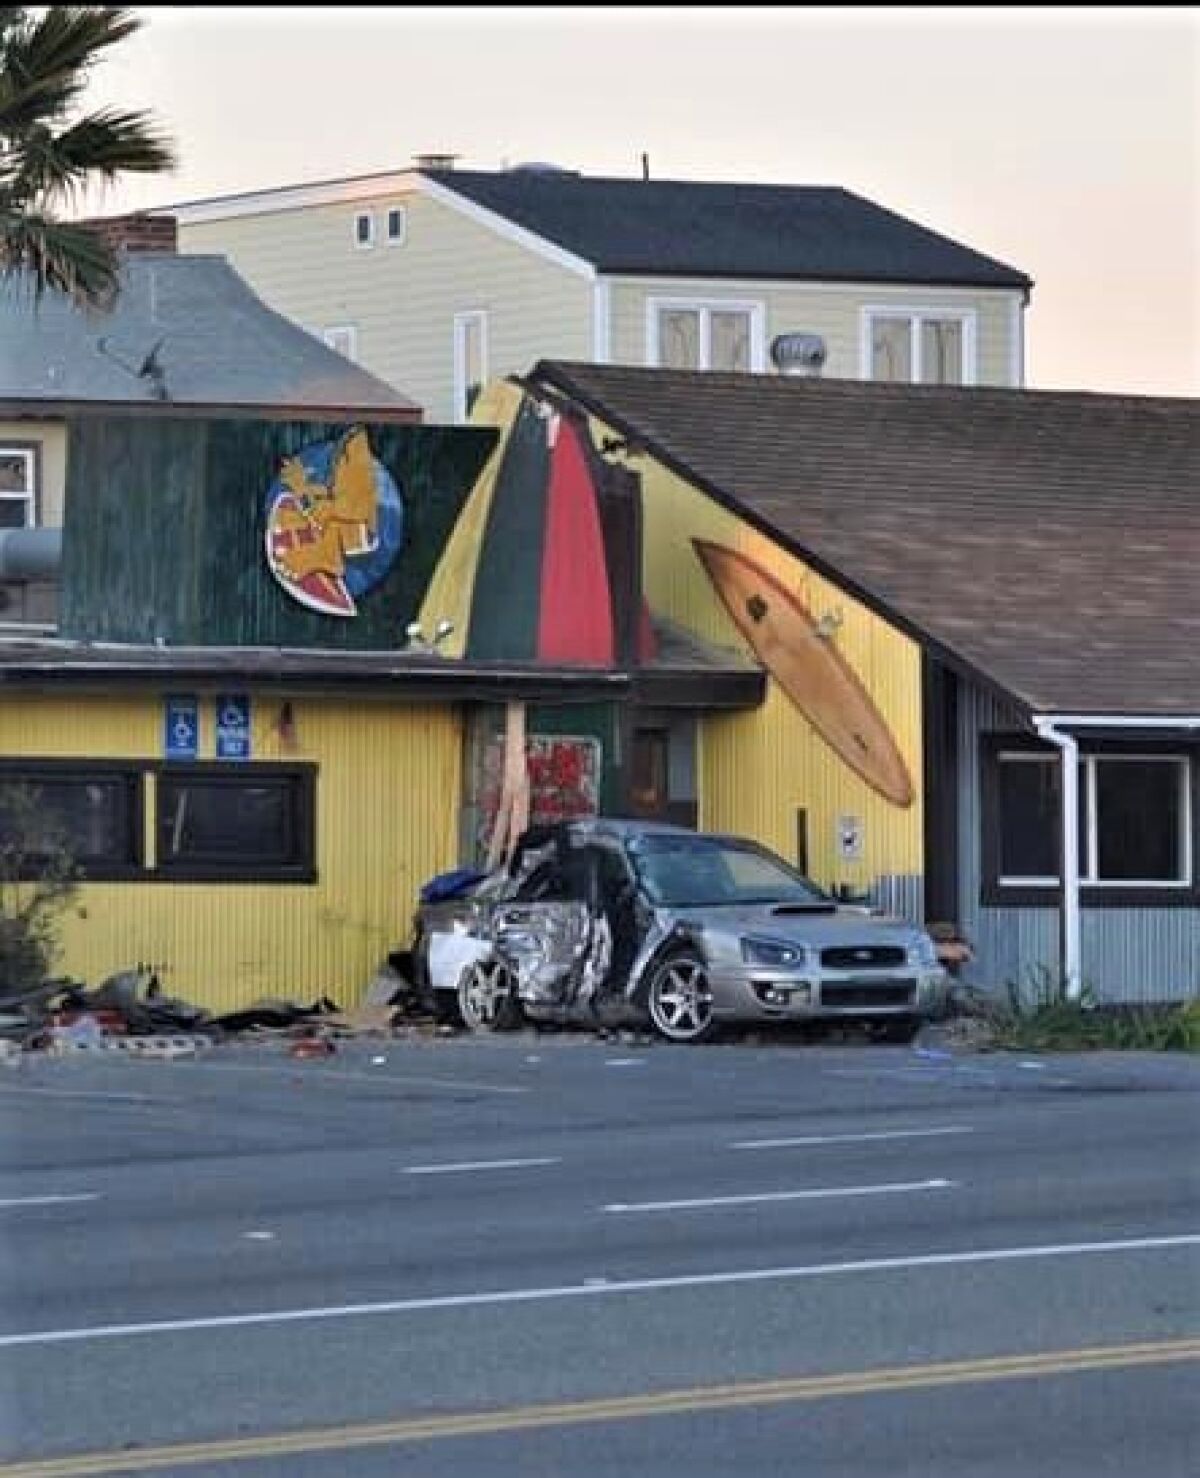 A photo shared on Facebook Monday shows a vehicle that crashed into a Taco Surf restaurant on PCH in Surfside.